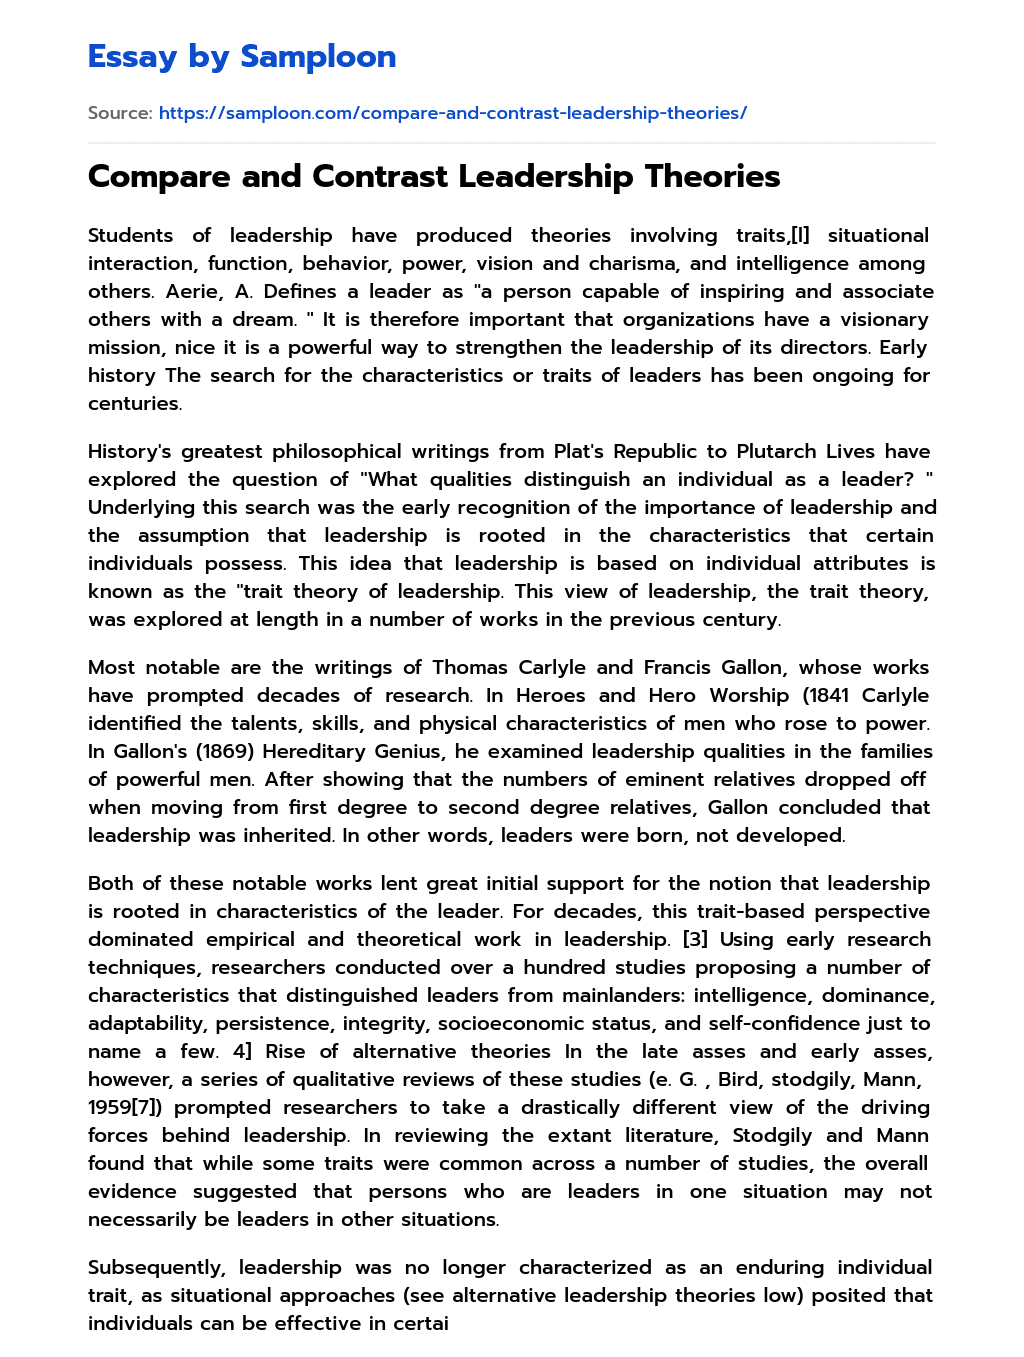 Compare and Contrast Leadership Theories essay